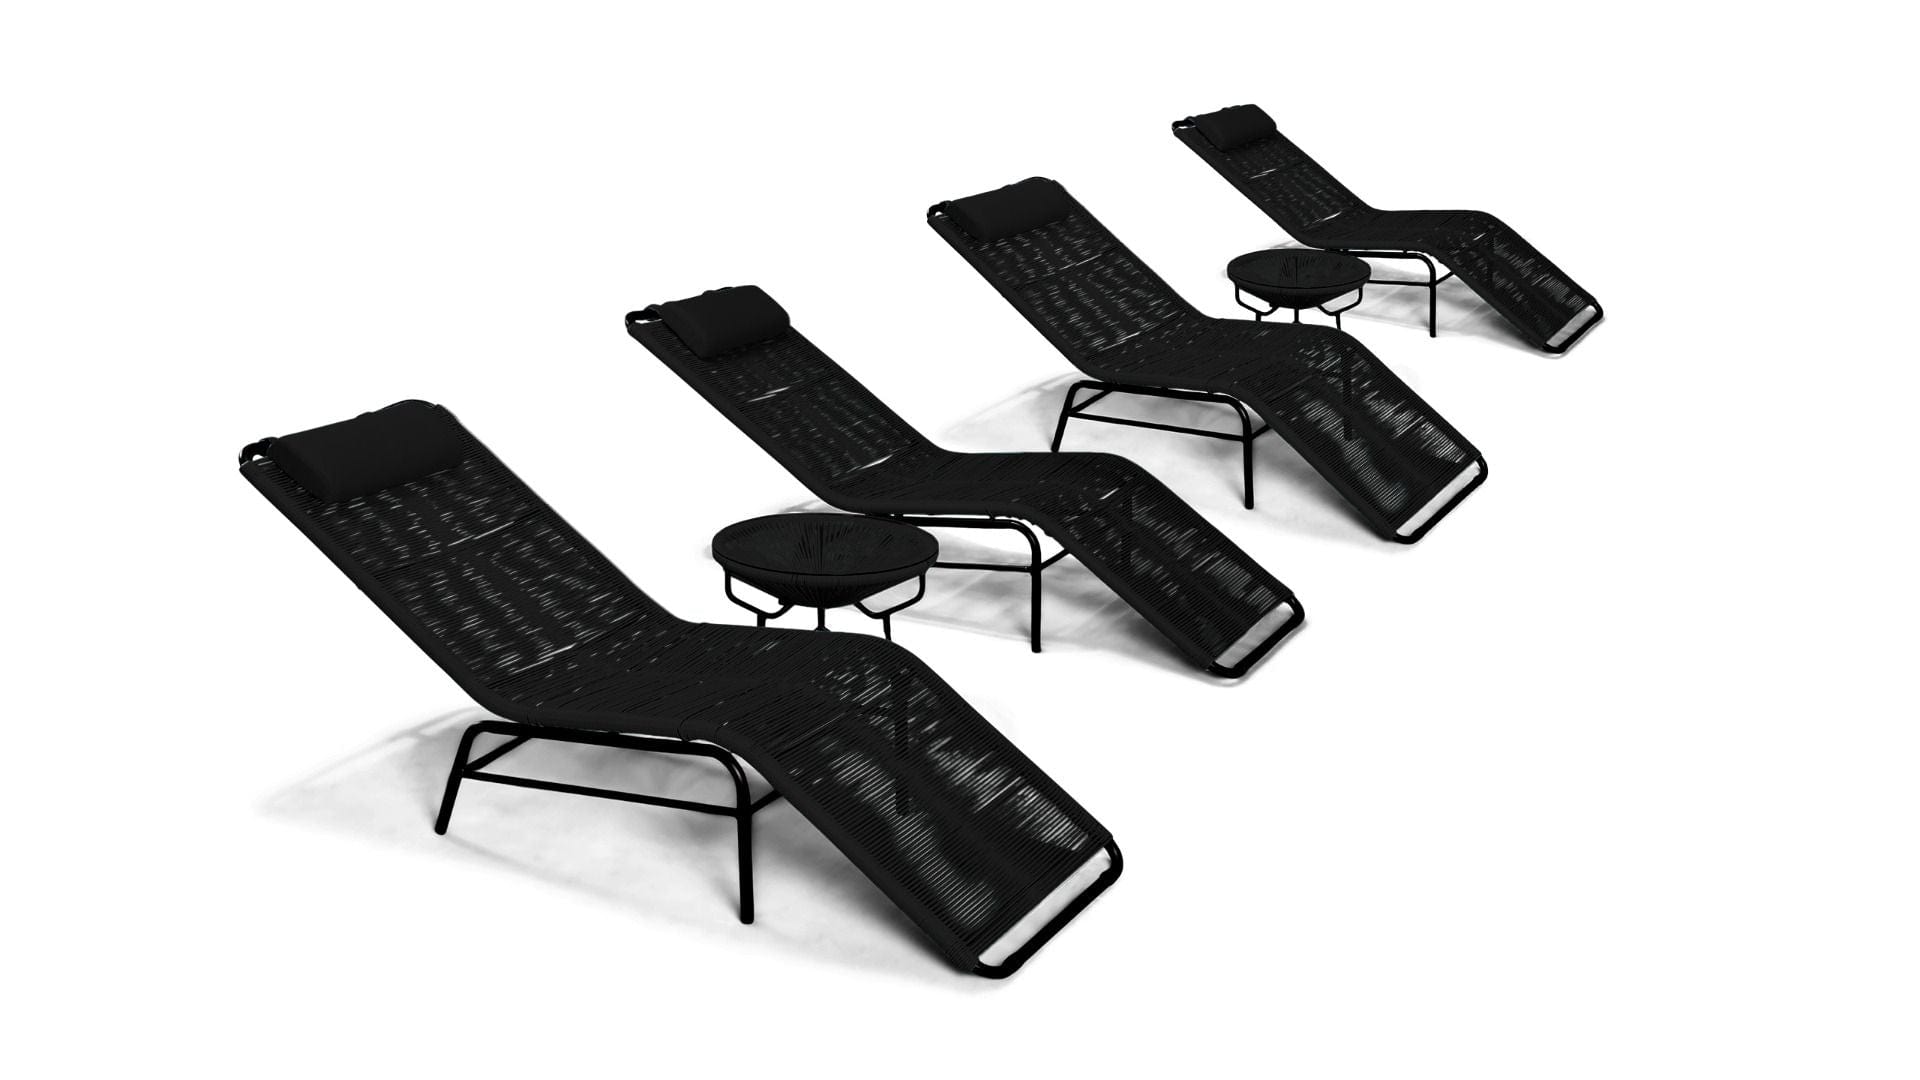 Harmonia Living Chaise Lounge Jet Black Harmonia Living - Acapulco 6 Piece Chaise Lounge Set - Two Table and Four Chaise Lounges | HL-ACA-6CLS